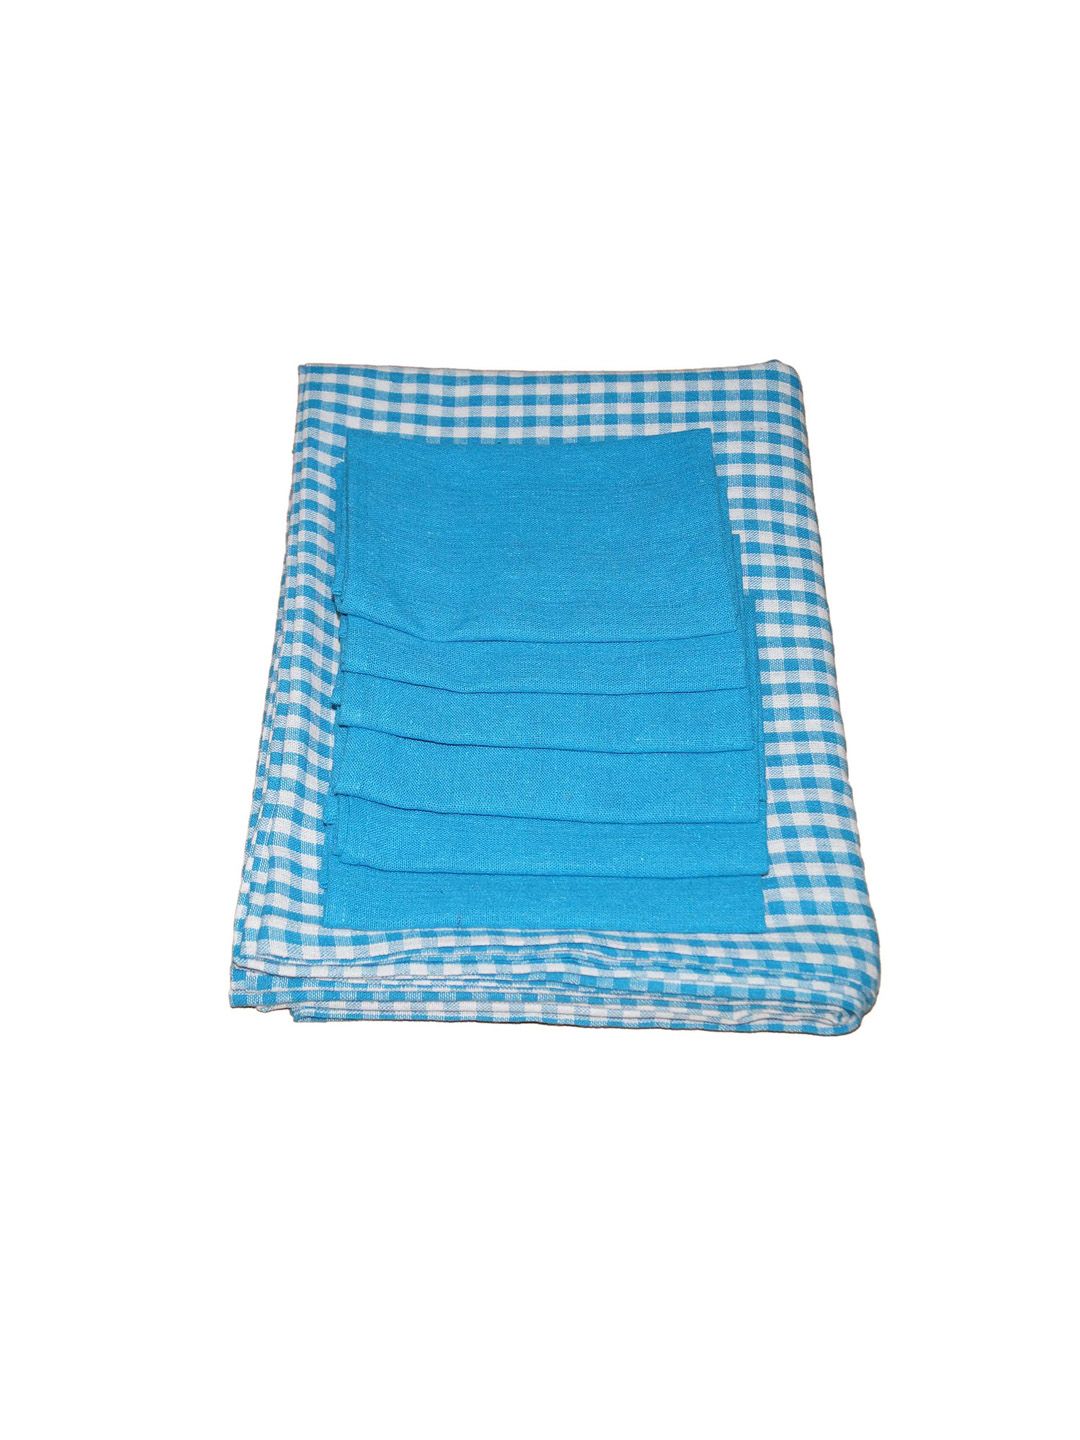 Lushomes Set Of 6 Blue Checked Dining Table Linen Set Price in India